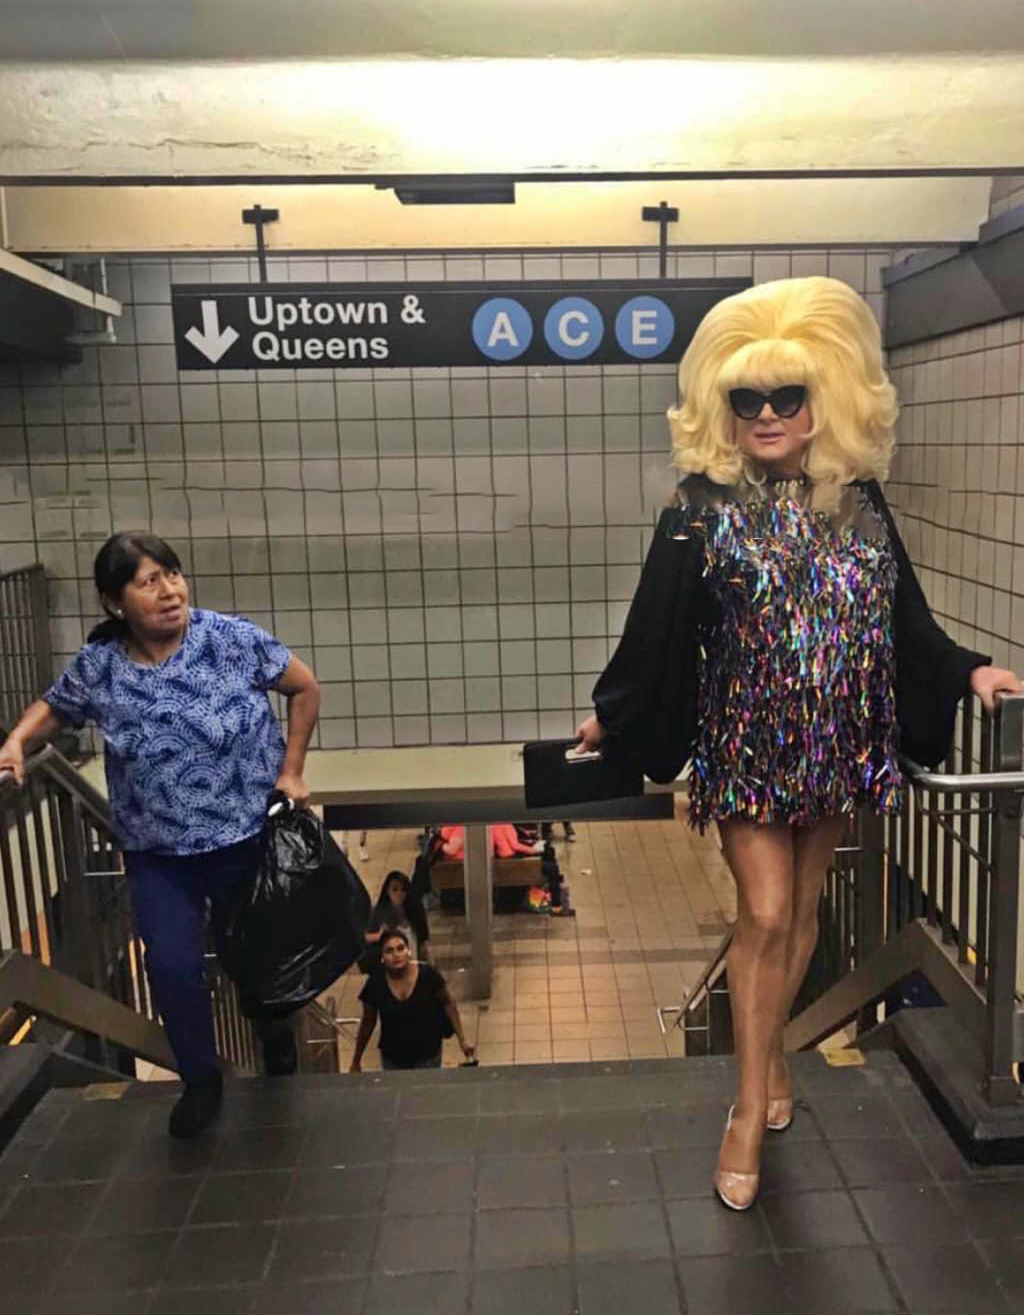 High Quality lady bunny subway woman stairs Blank Meme Template